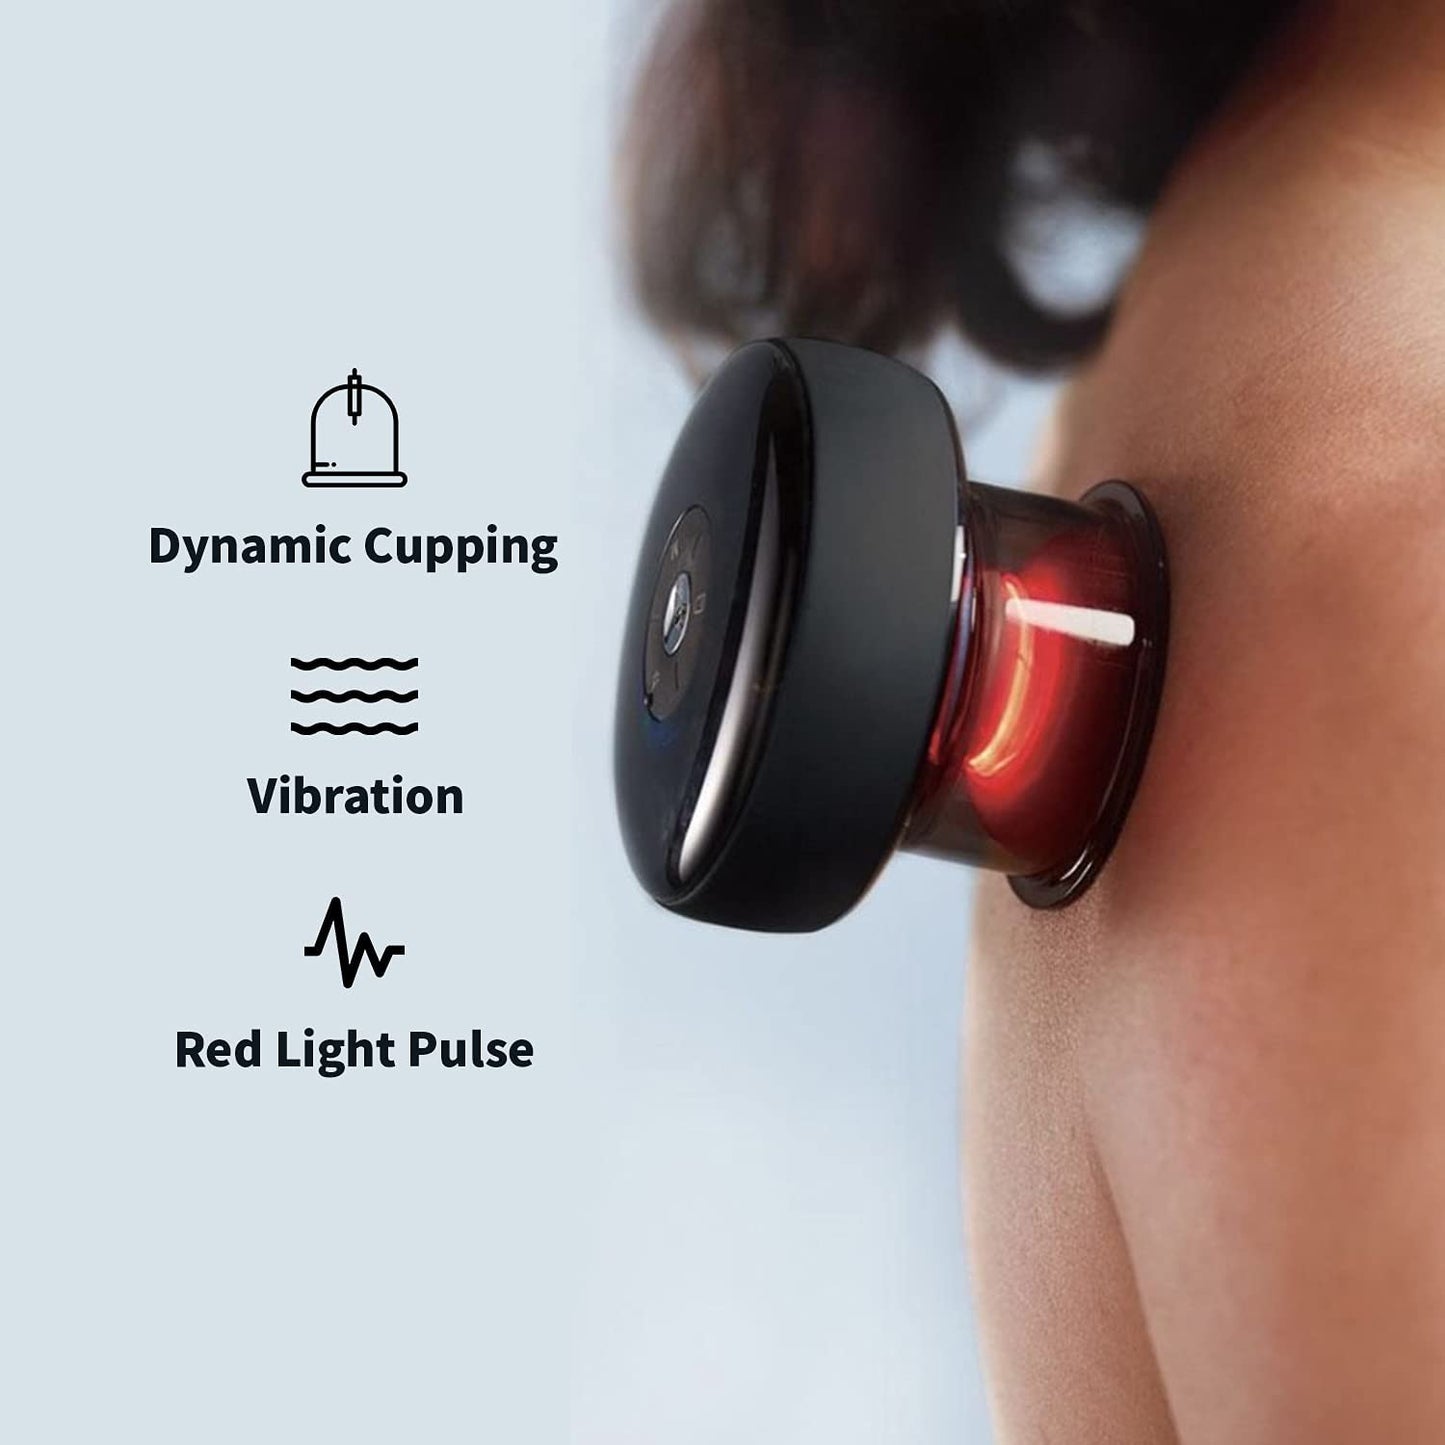 Powered Cupping Therapy by VacuCup – Myofacial Release, Trigger Point Release, Increase Circulation, Cell Repair and Increase Flexibility. Cupping Therapy Massager for Neck, Back, Quad, Calf and More.